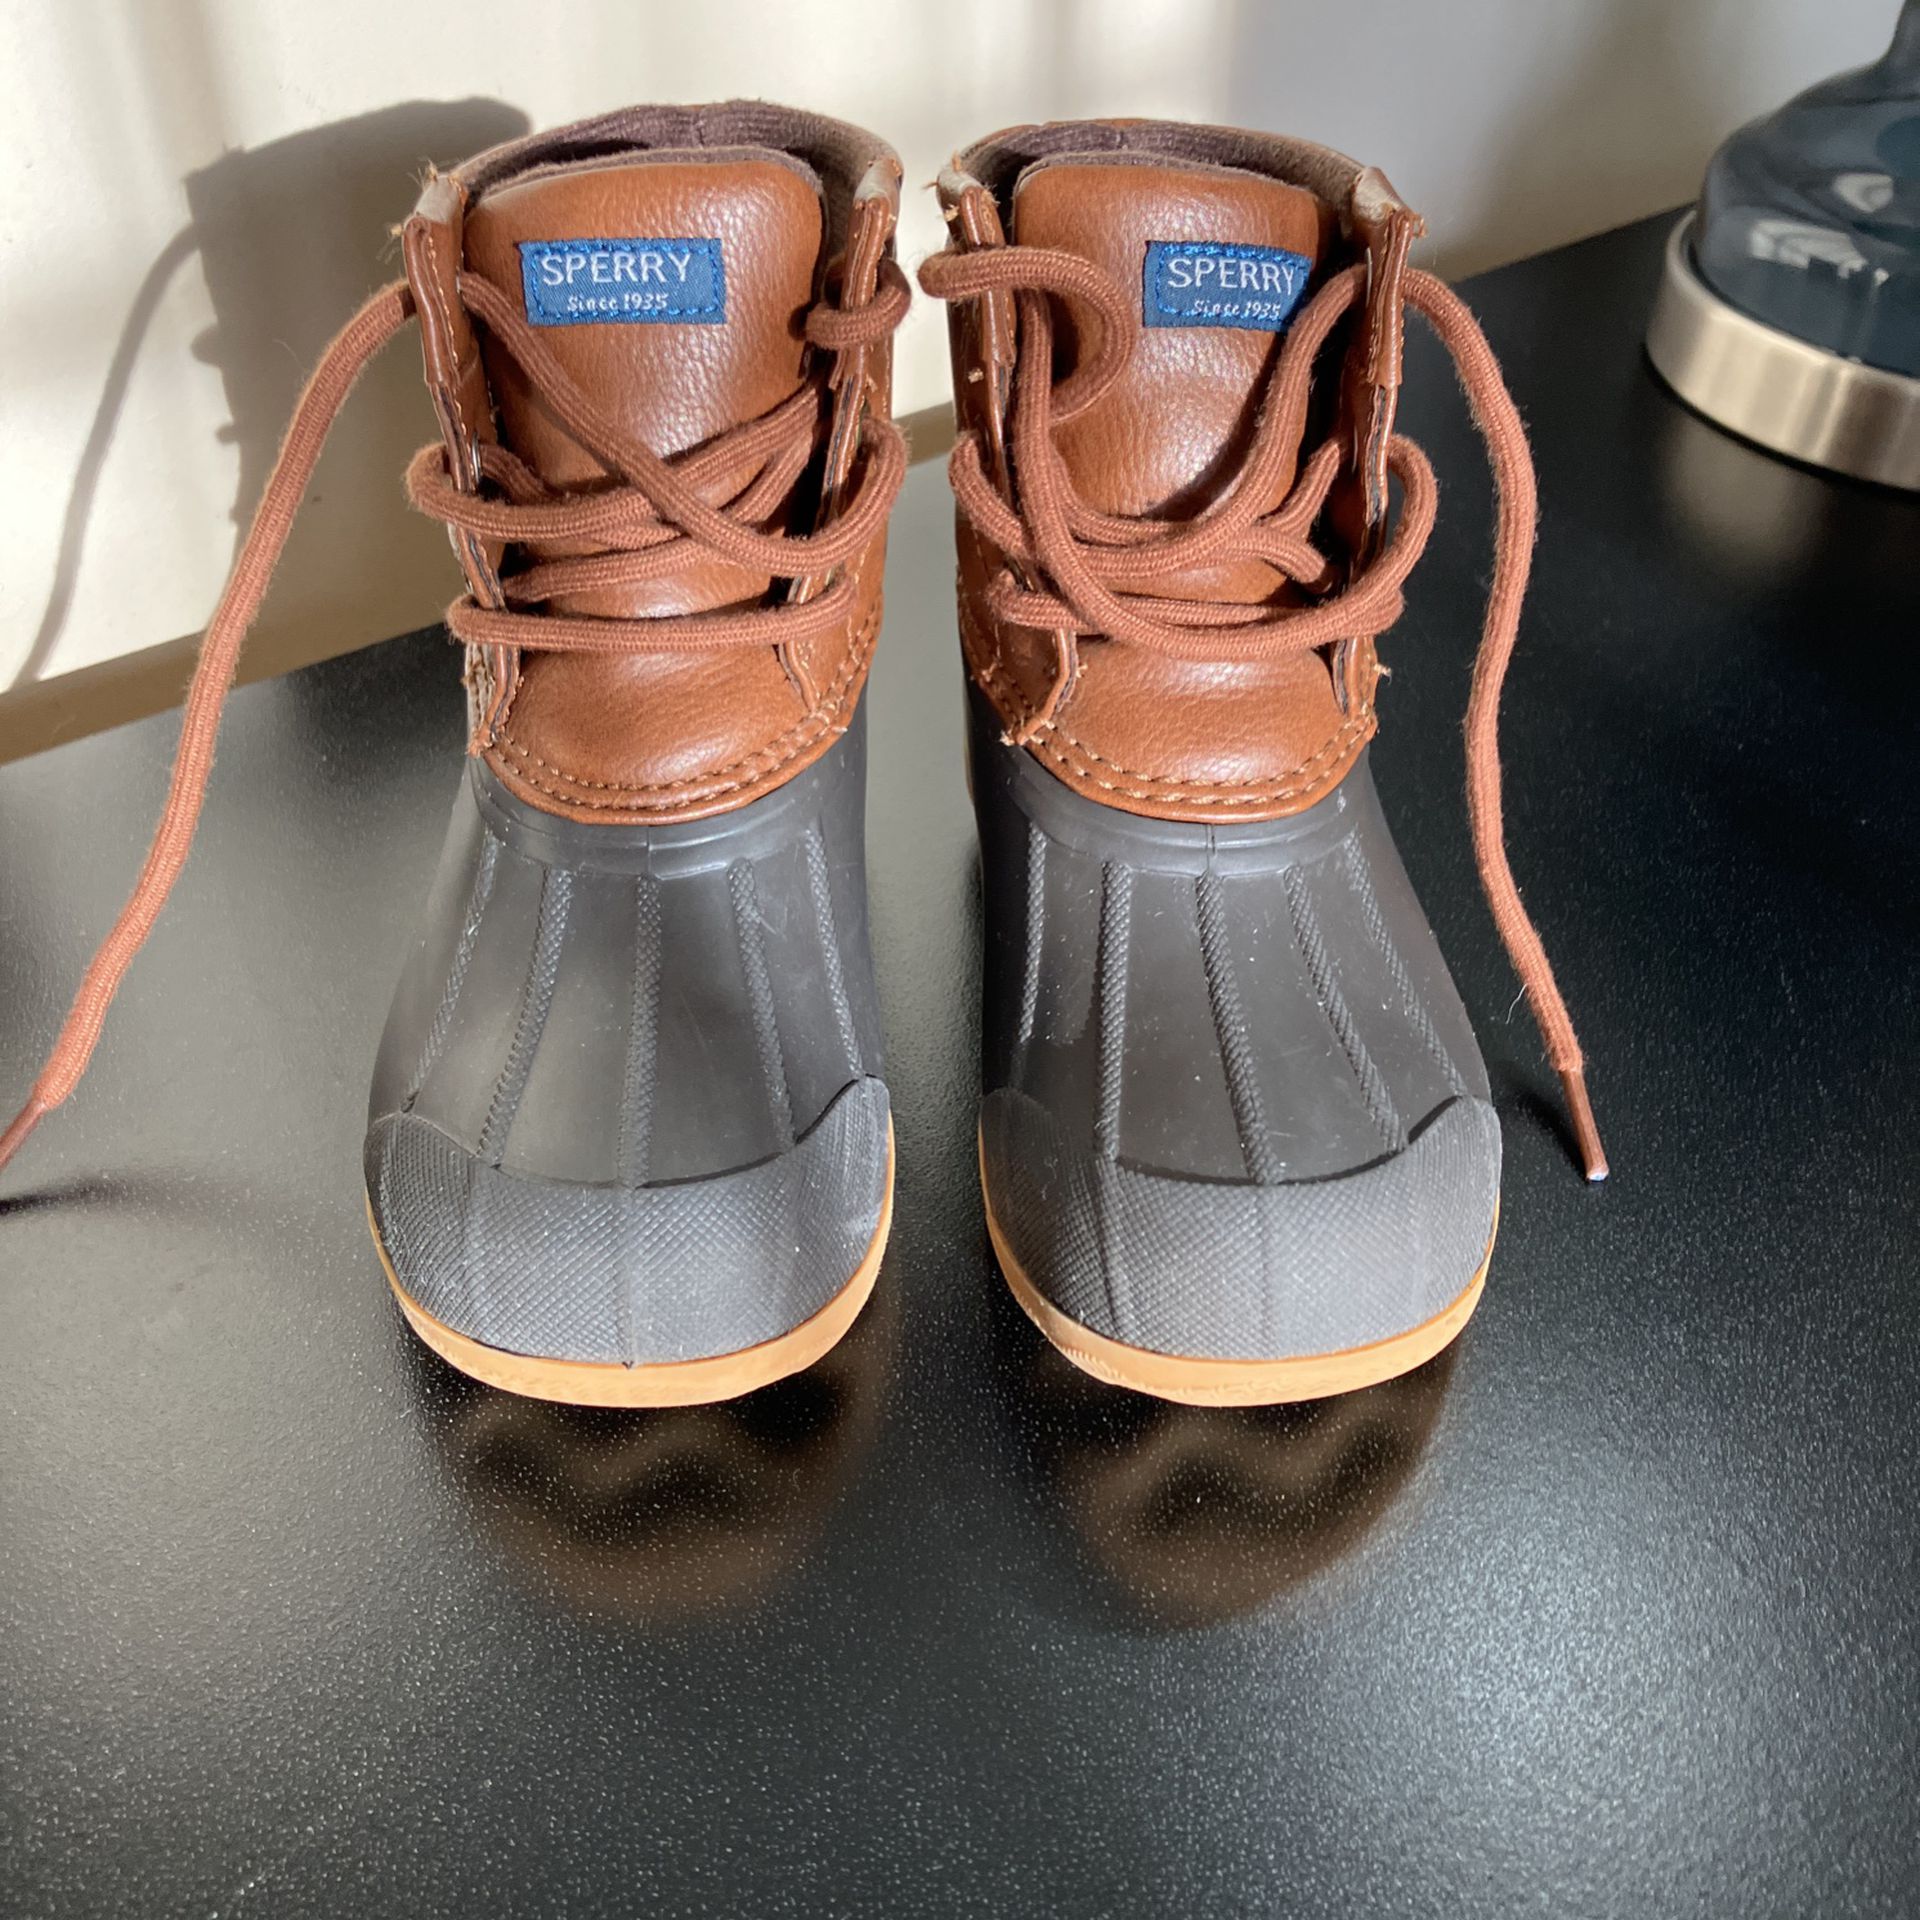 Boys (Toddler) Sperry Boots Size 10M